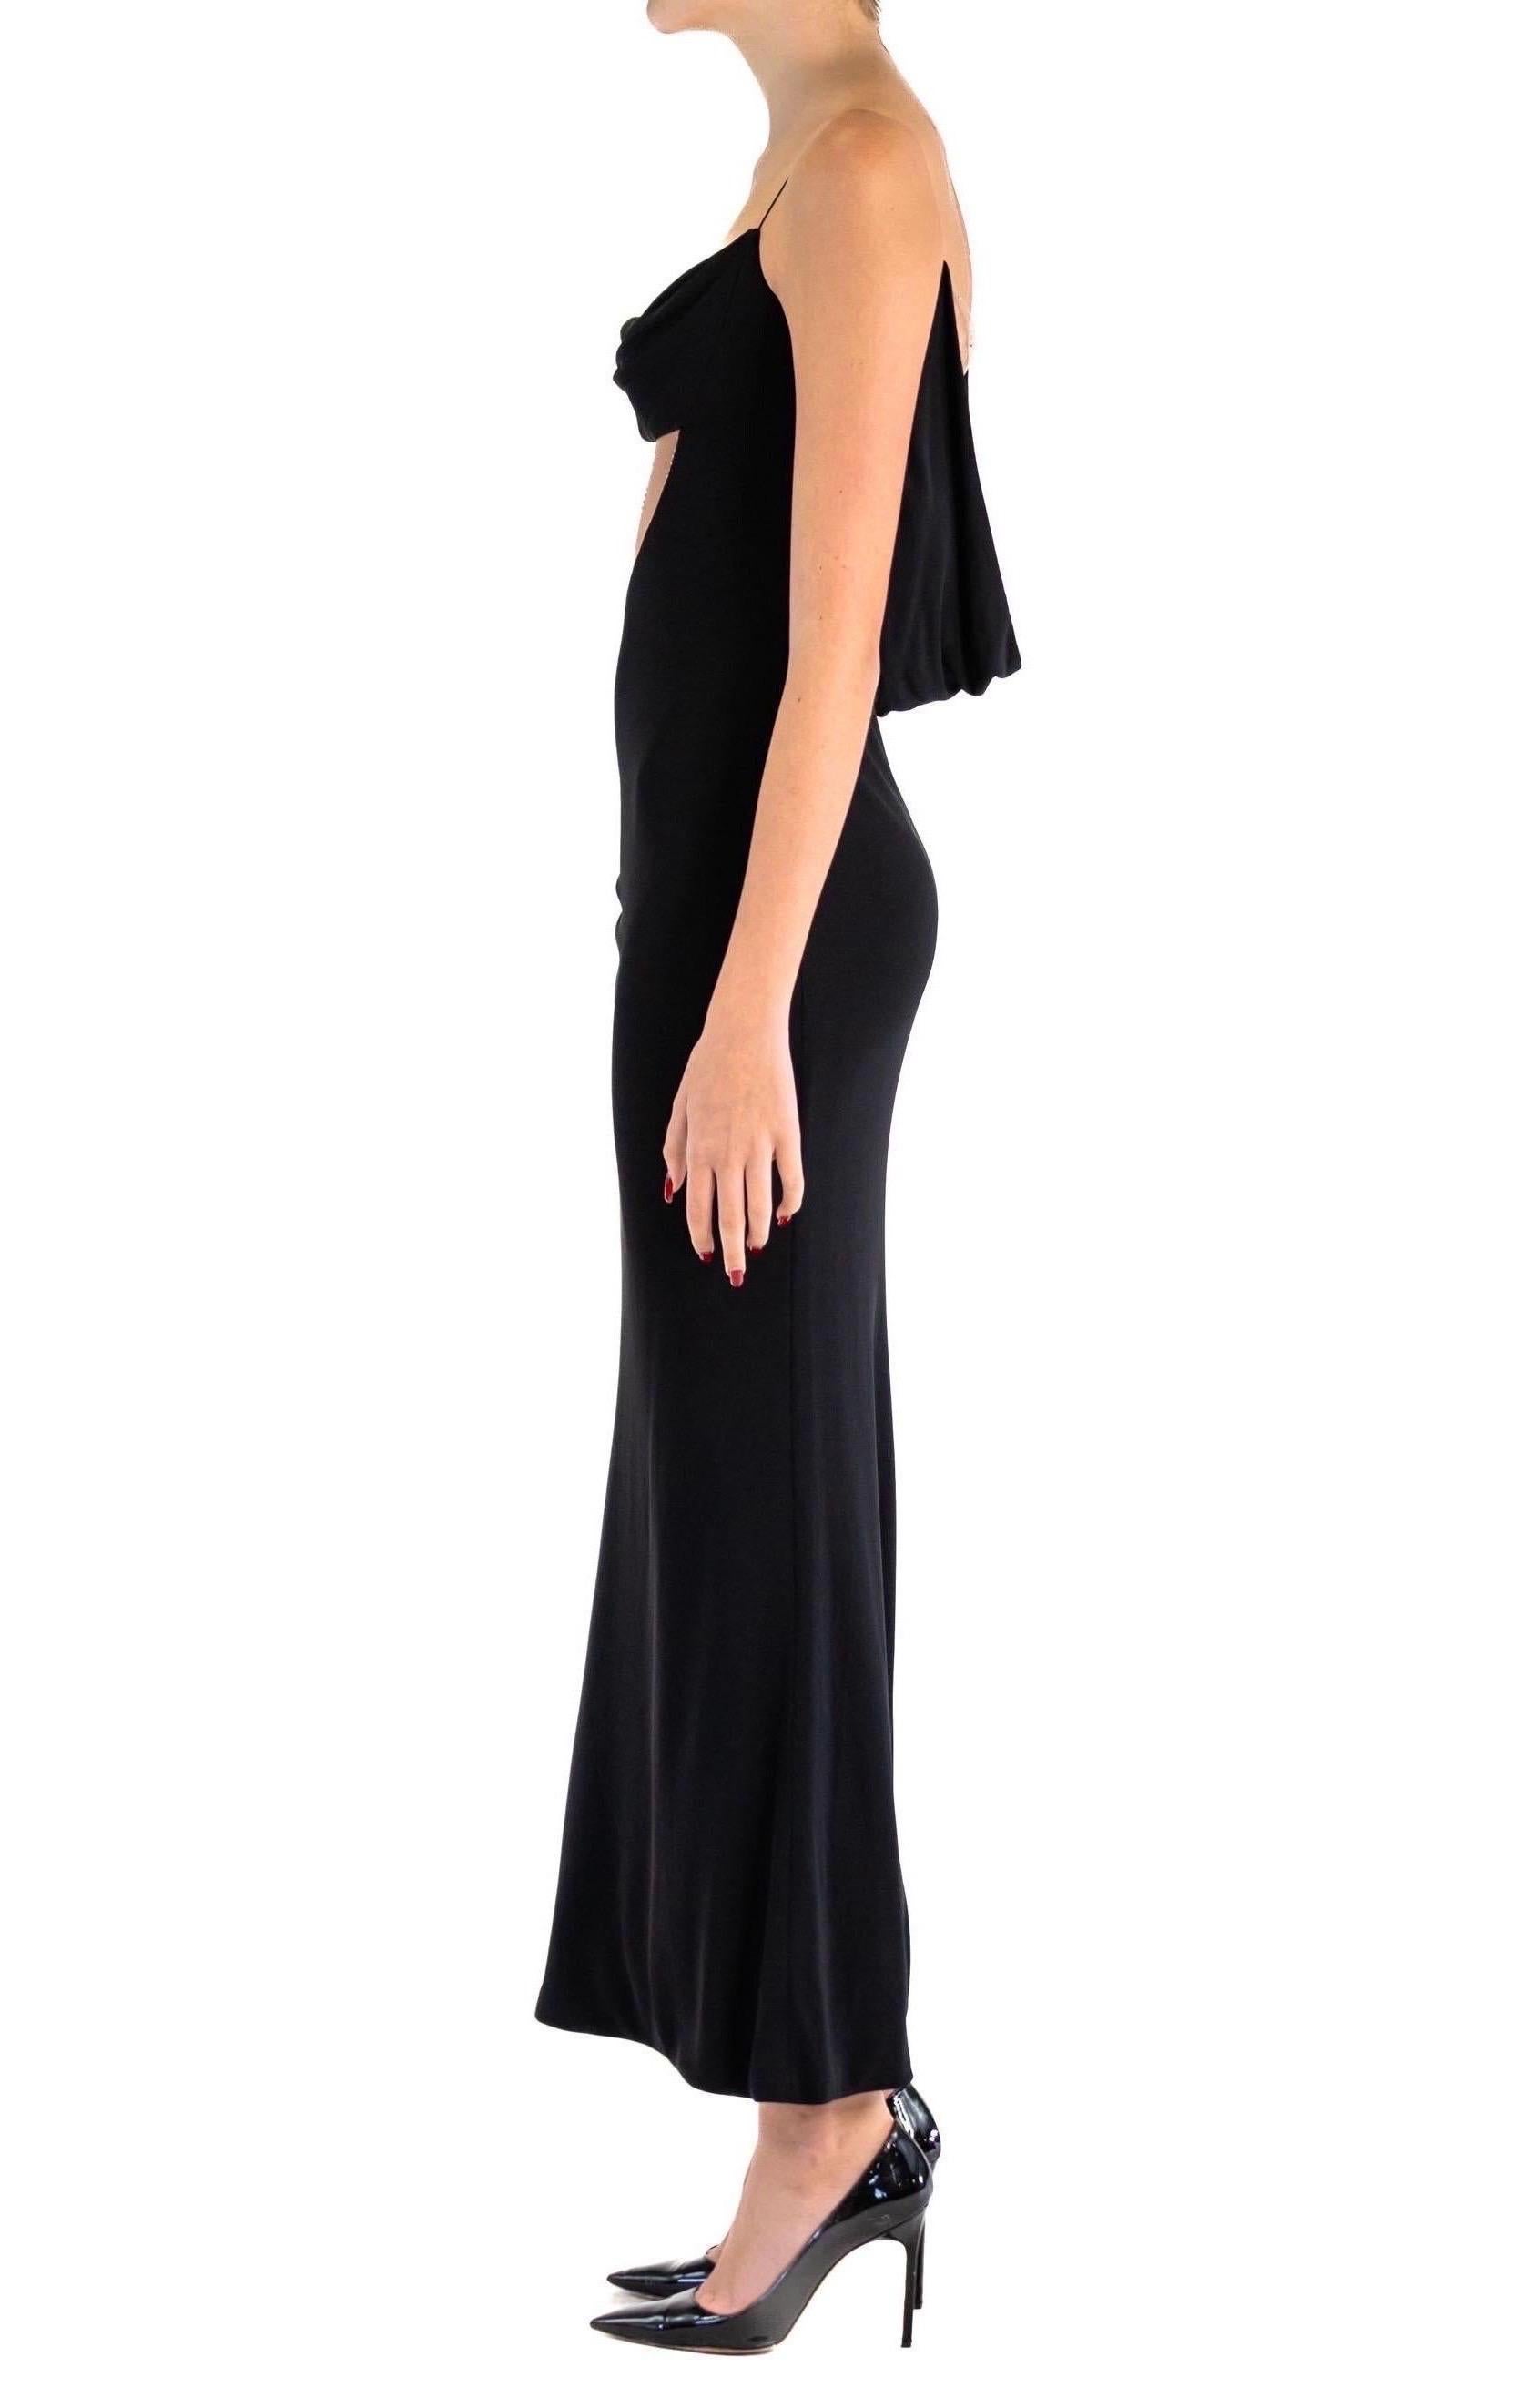 2000S JIKI Black Slinky Rayon Jersey One Shoulder Gown With Crystal Studded Nud In Excellent Condition For Sale In New York, NY